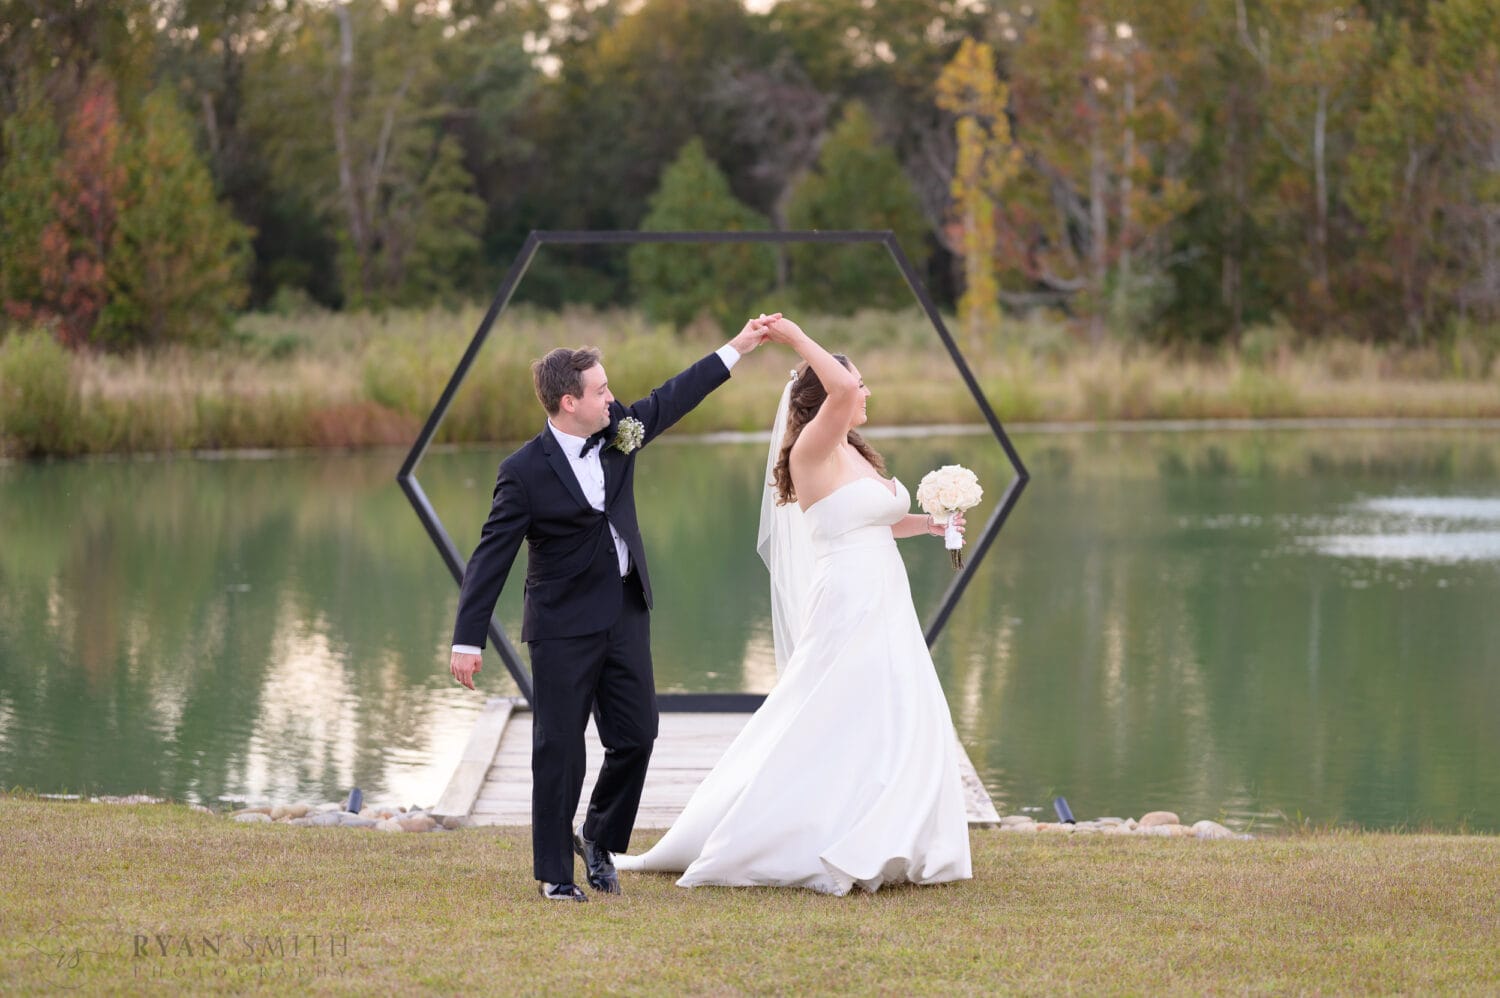 Spin by the lake - The Venue at White Oaks Farm